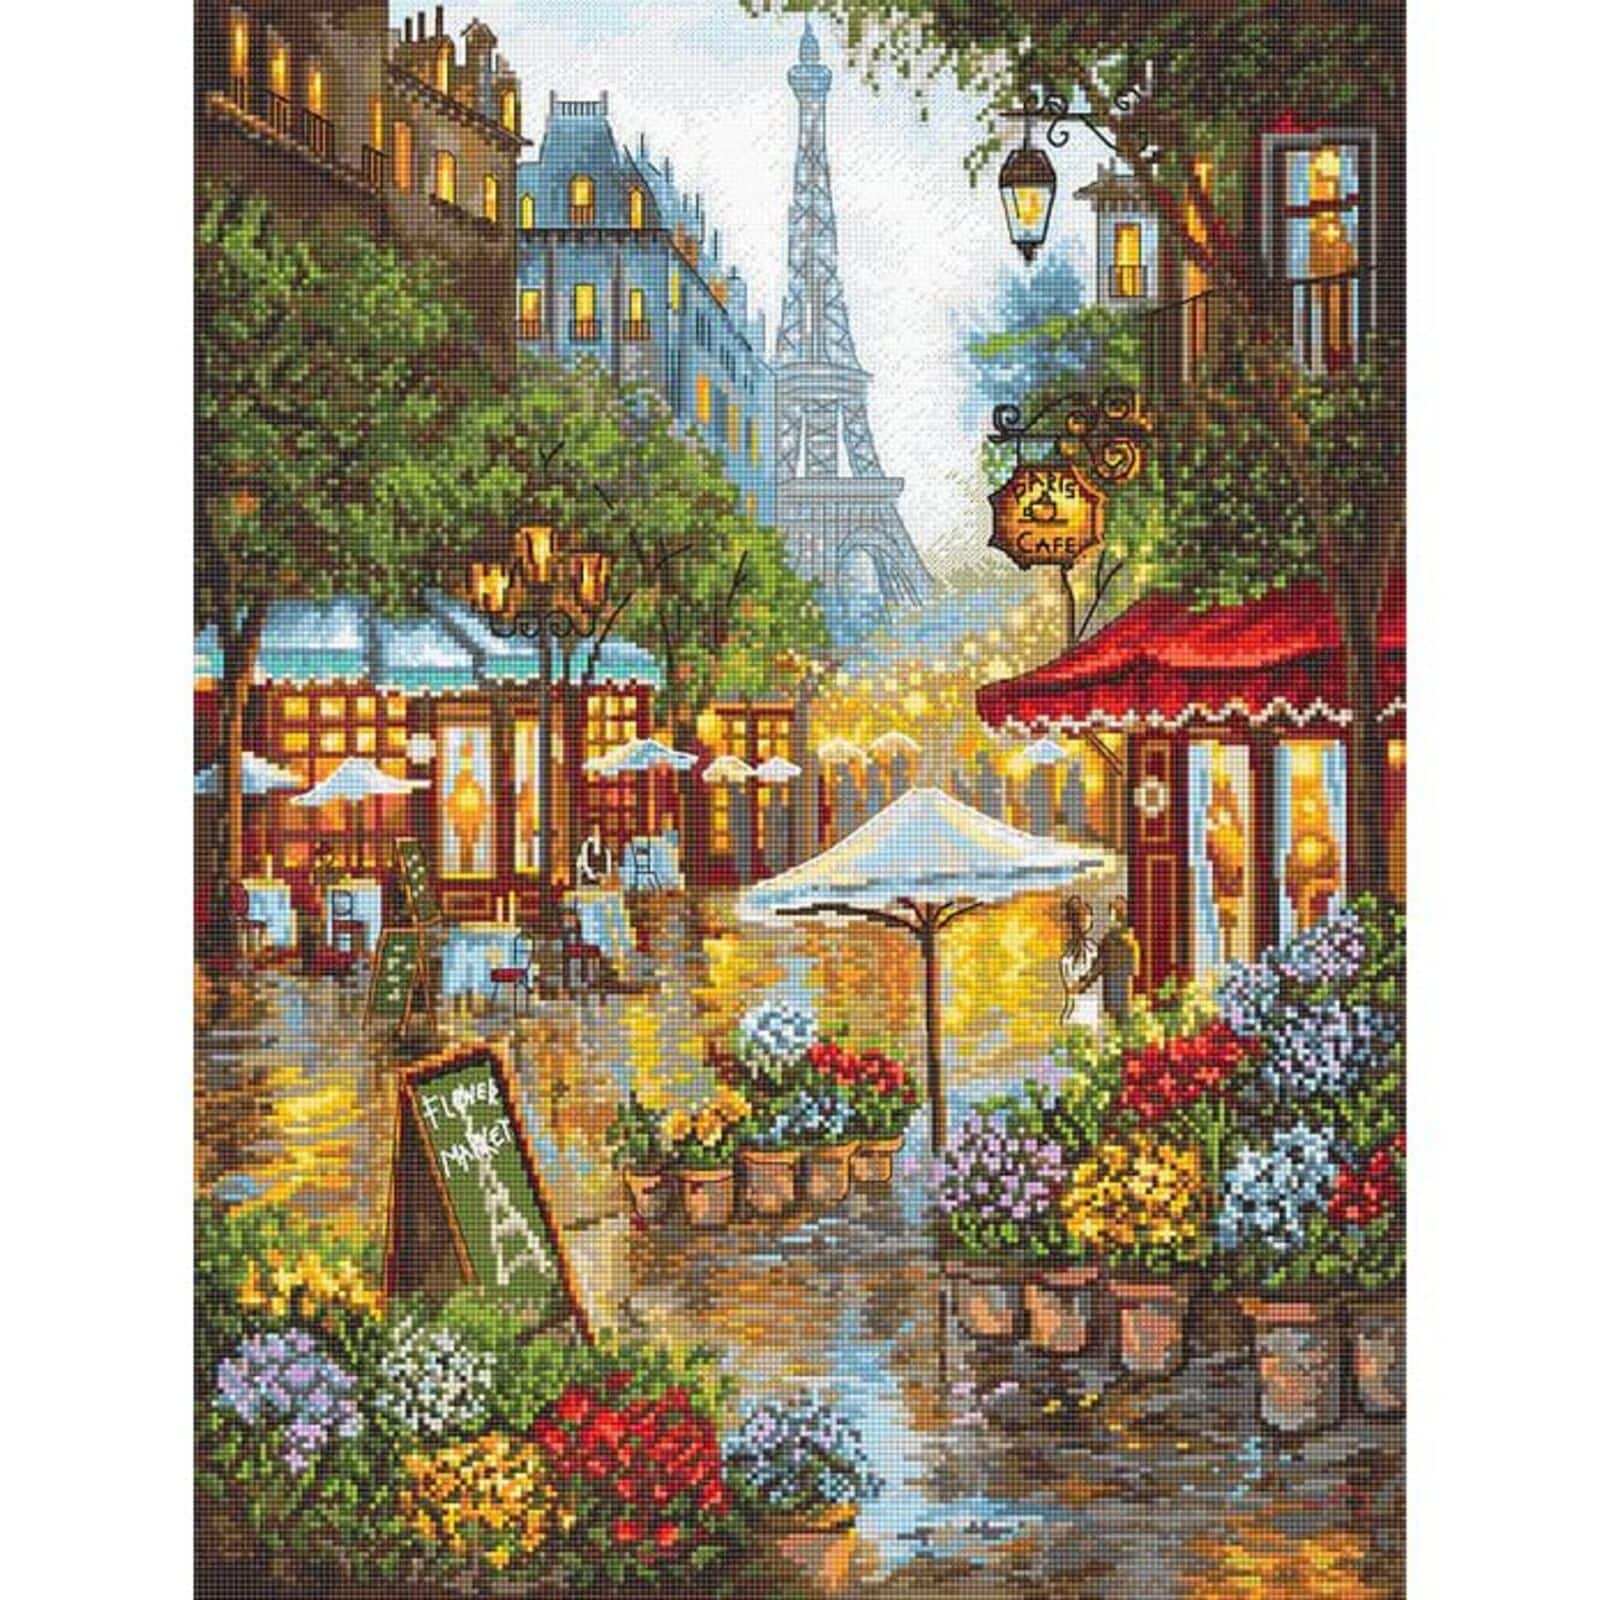 Letistitch Counted Cross Stitch Kit Spring Flowers, Paris